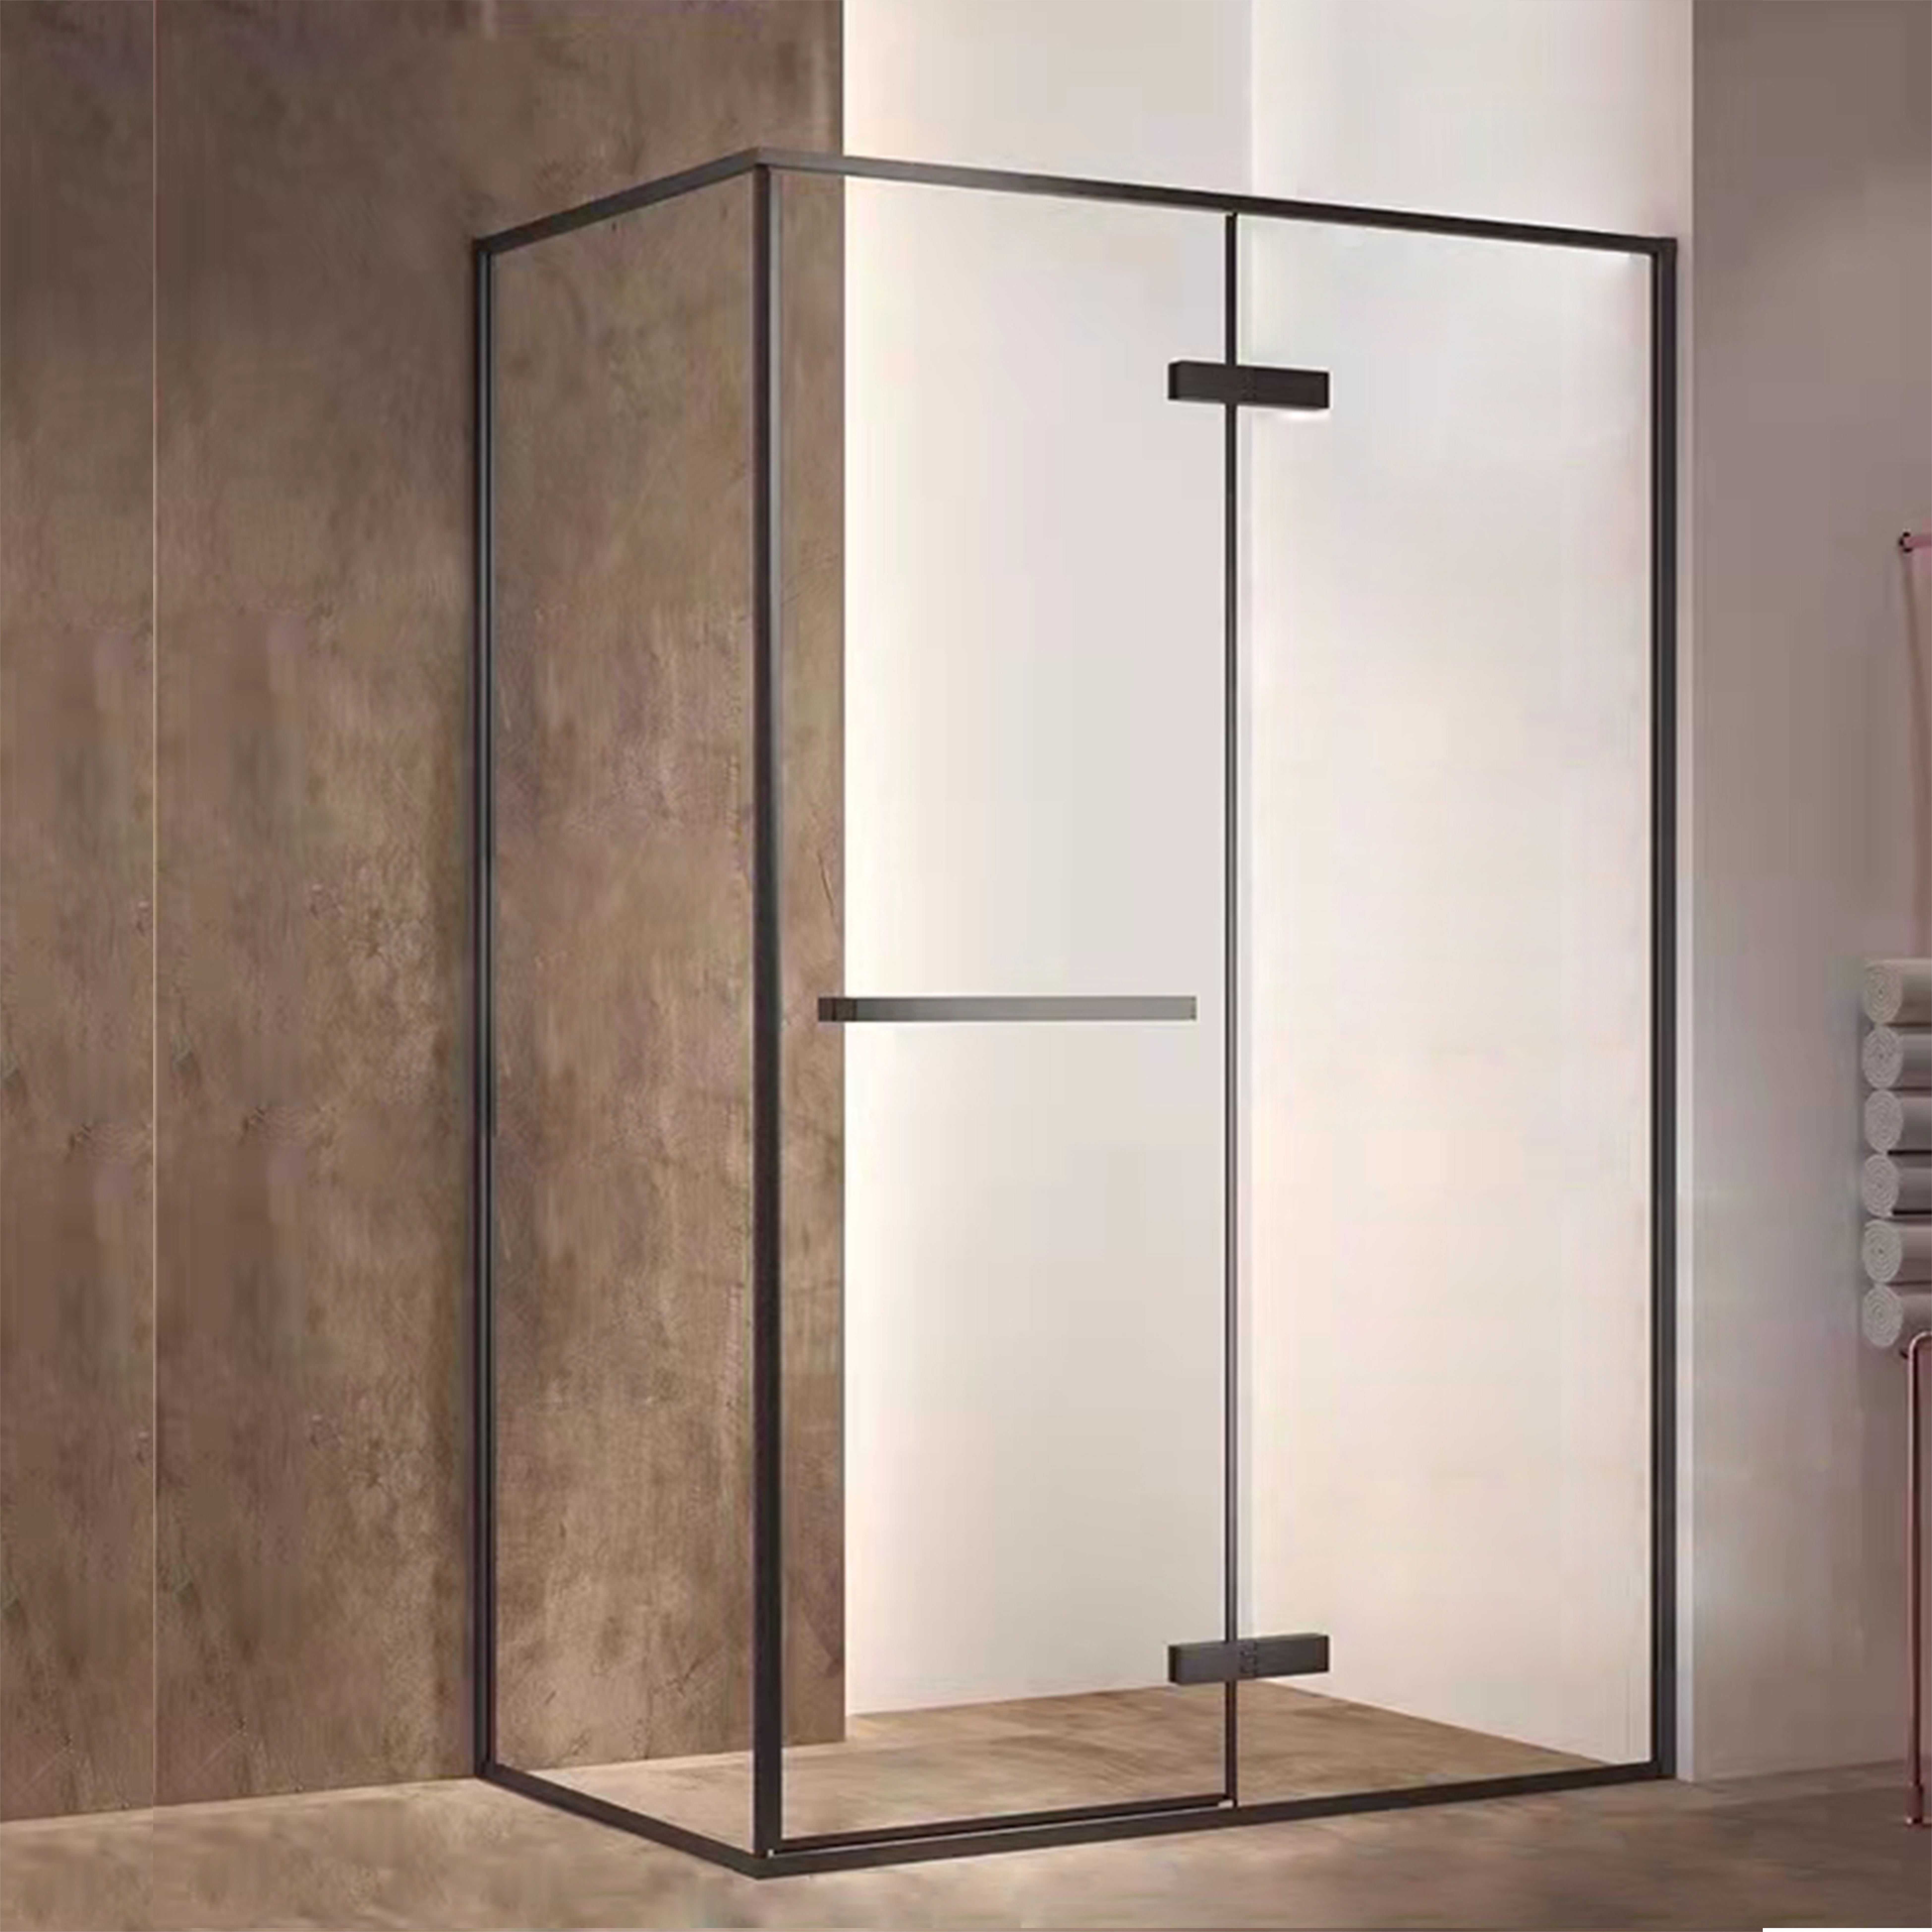 How To Clean Shower Enclosure Glass